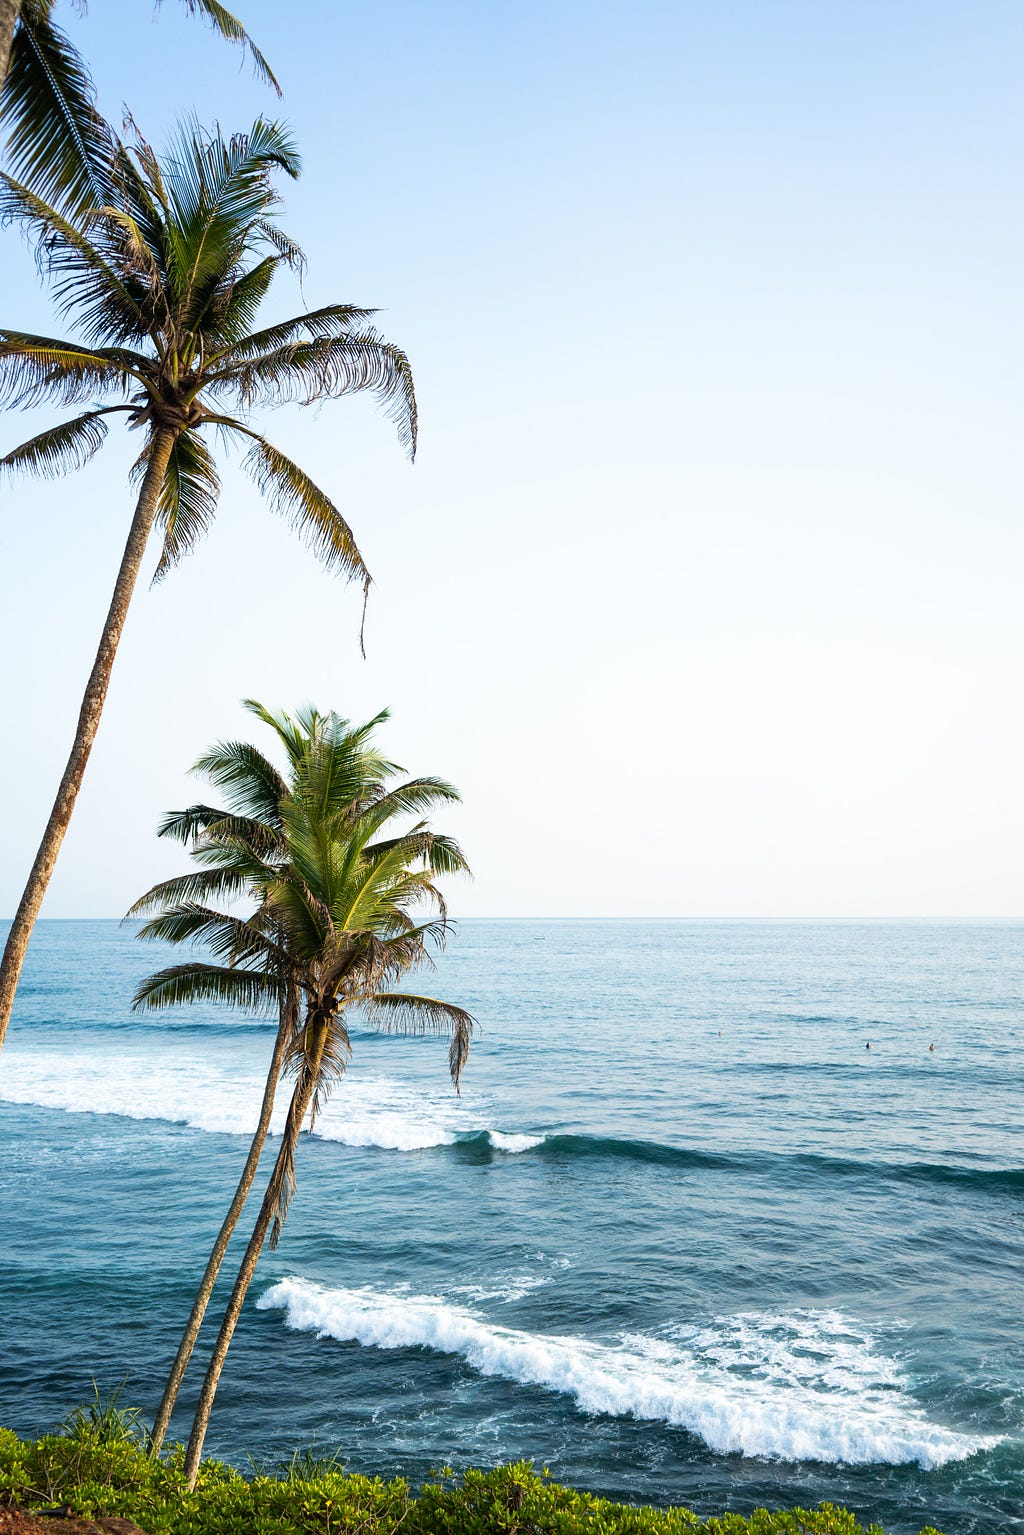 Coconut trees against the sea — Small town tale from coastal India